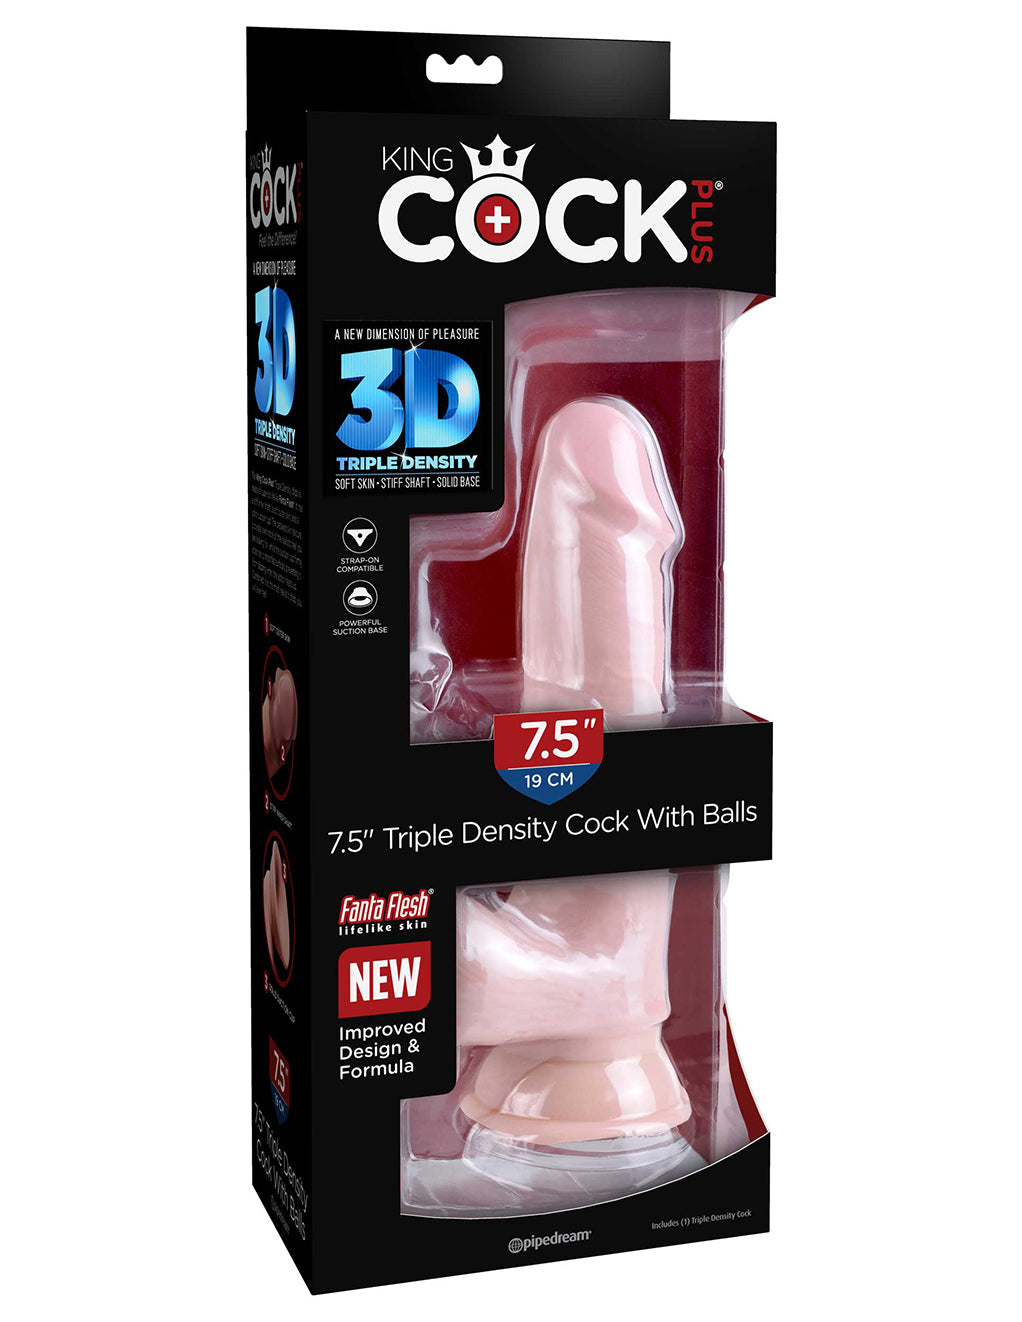 King Cock Plus 7.5" 3D Cock w/ Balls- Package